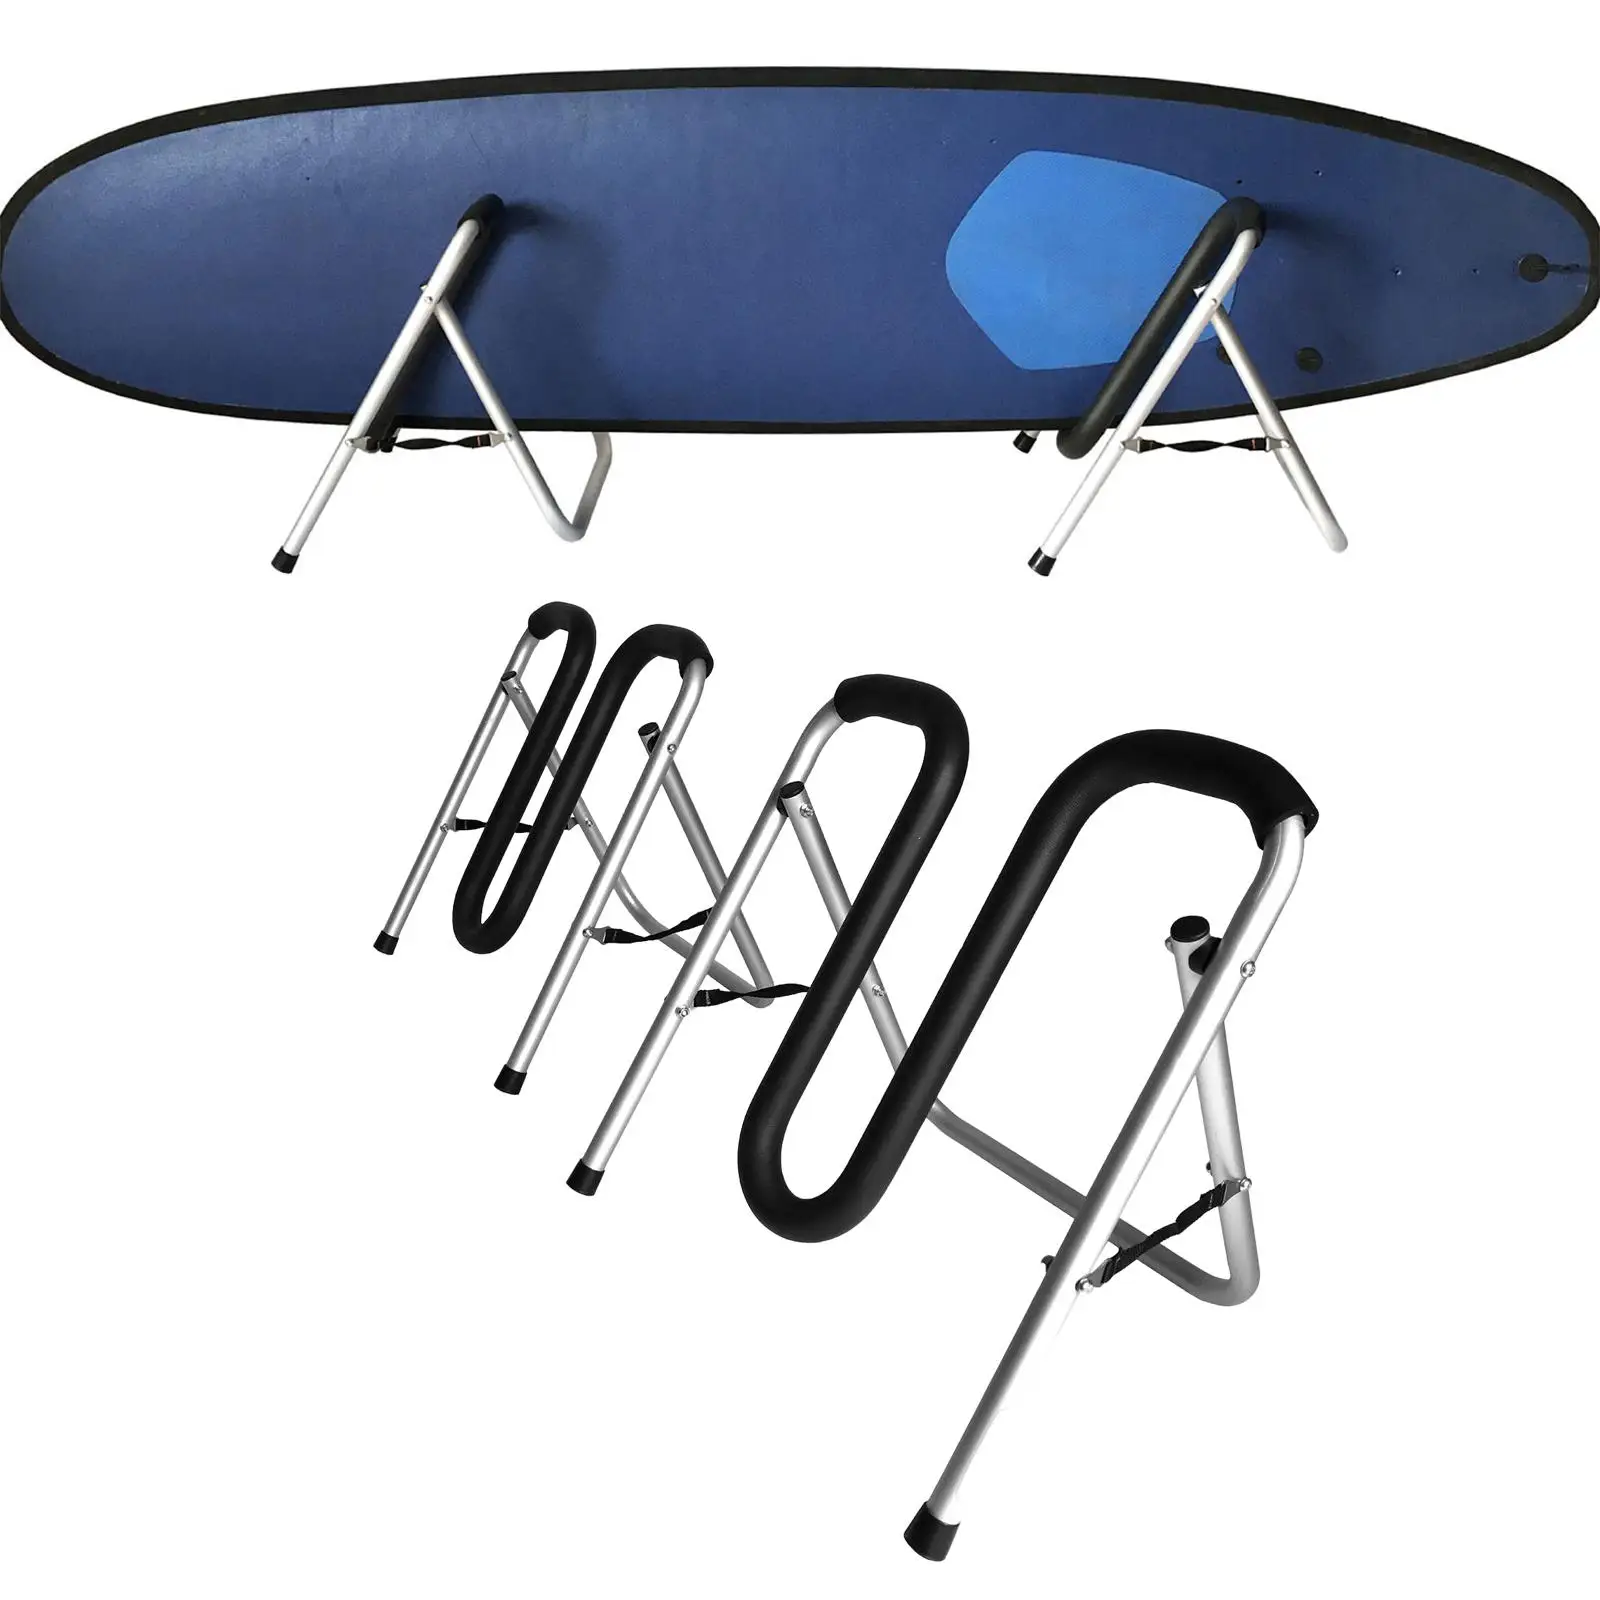 Surfboard Stand Holds Longboards and Shortboards Skateboard Storage Display Stand Surf Board Rack